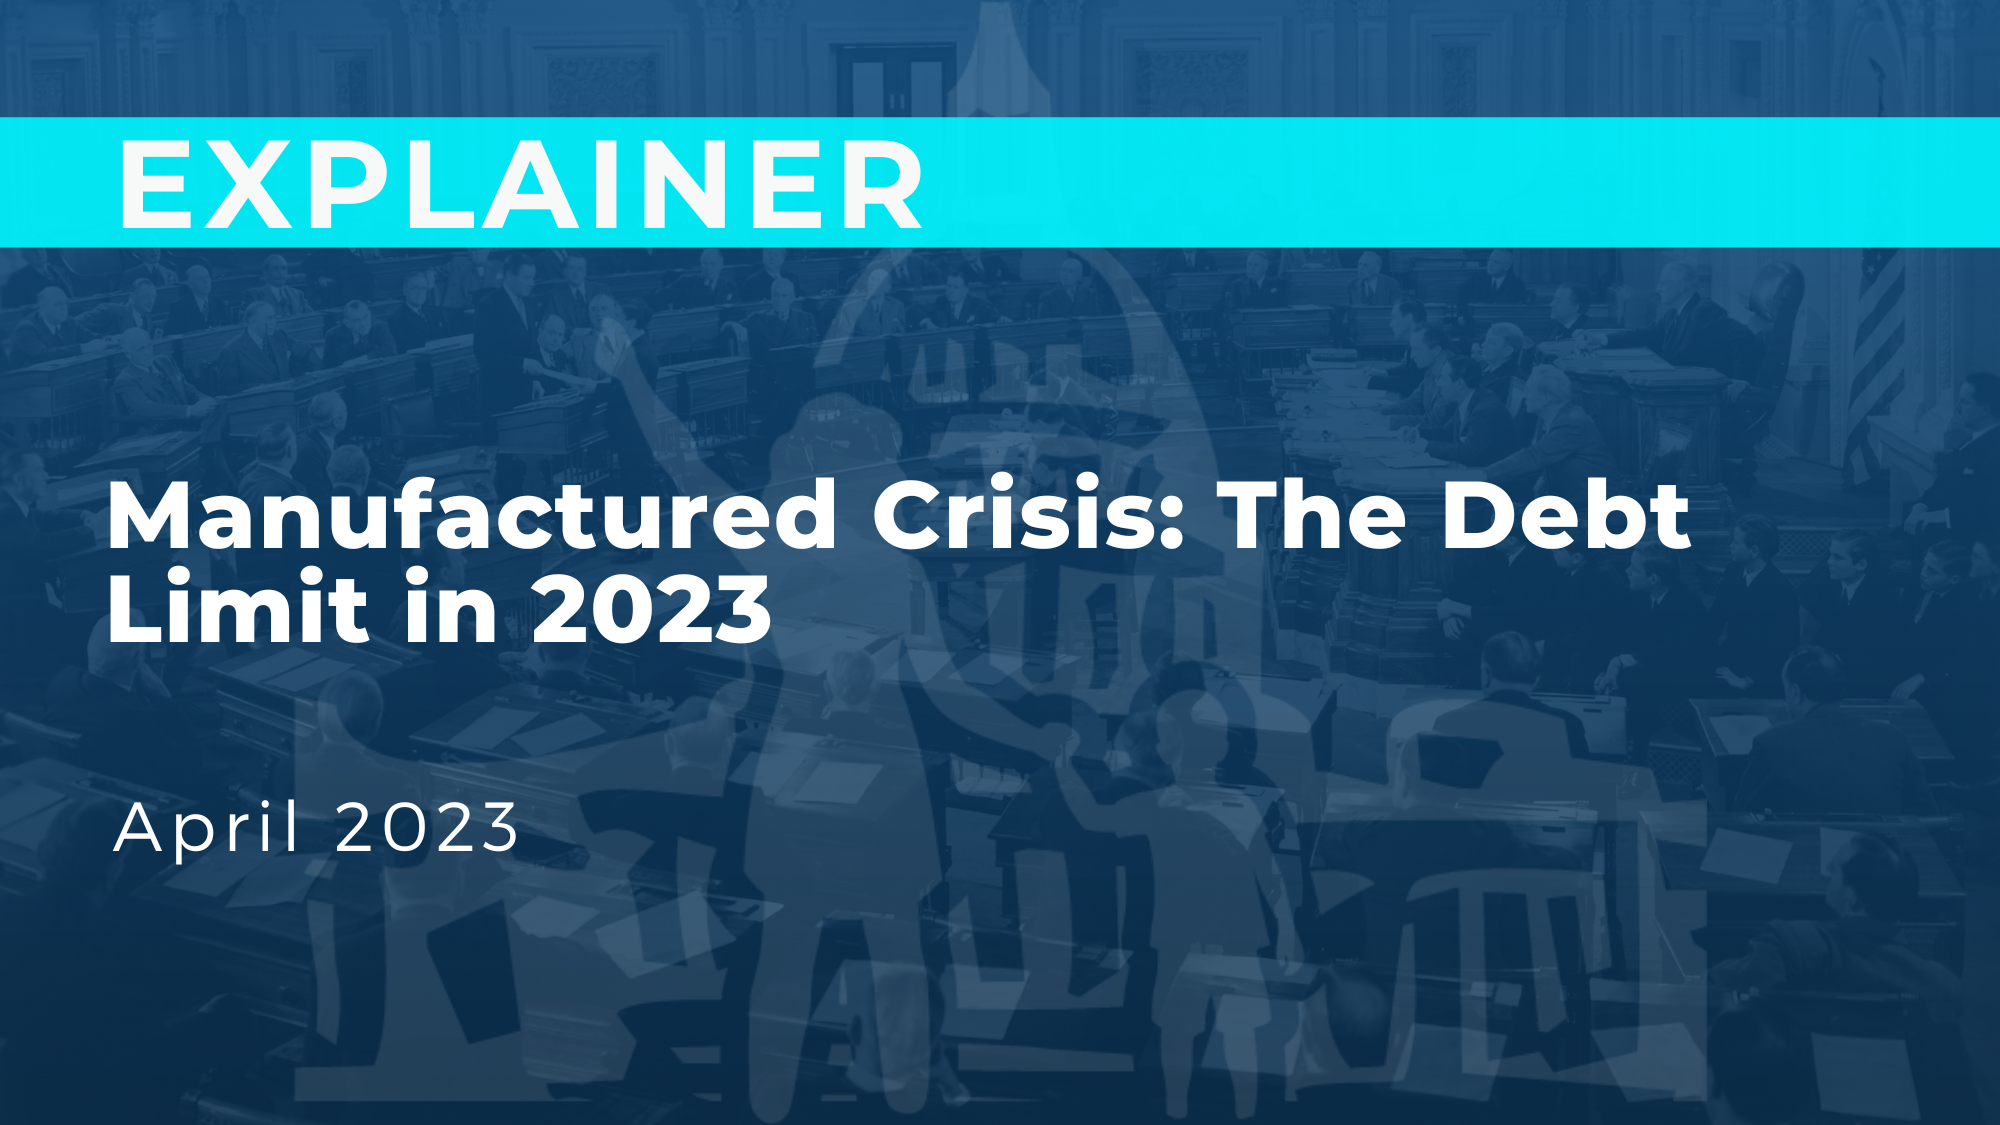 Manufactured Crisis: The Debt Limit in 2023